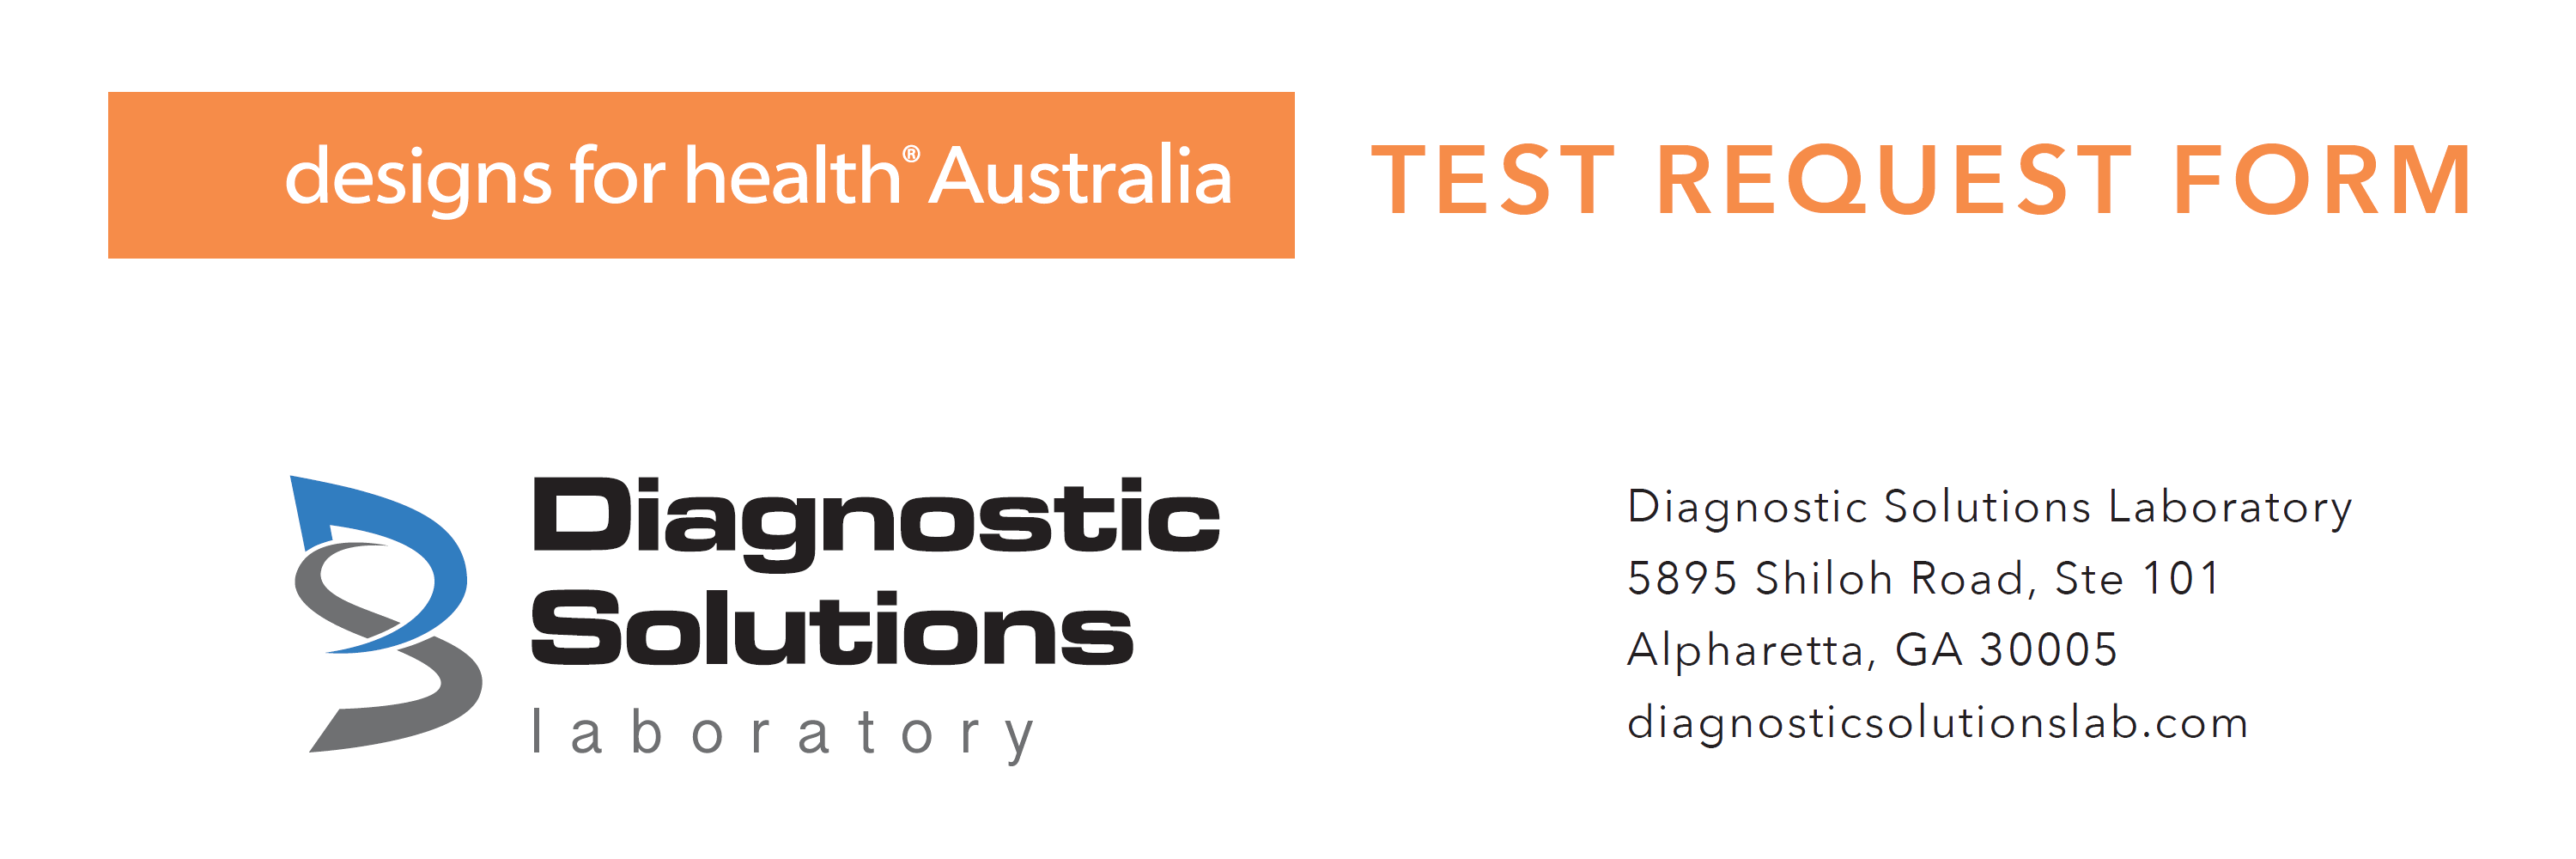 test request form